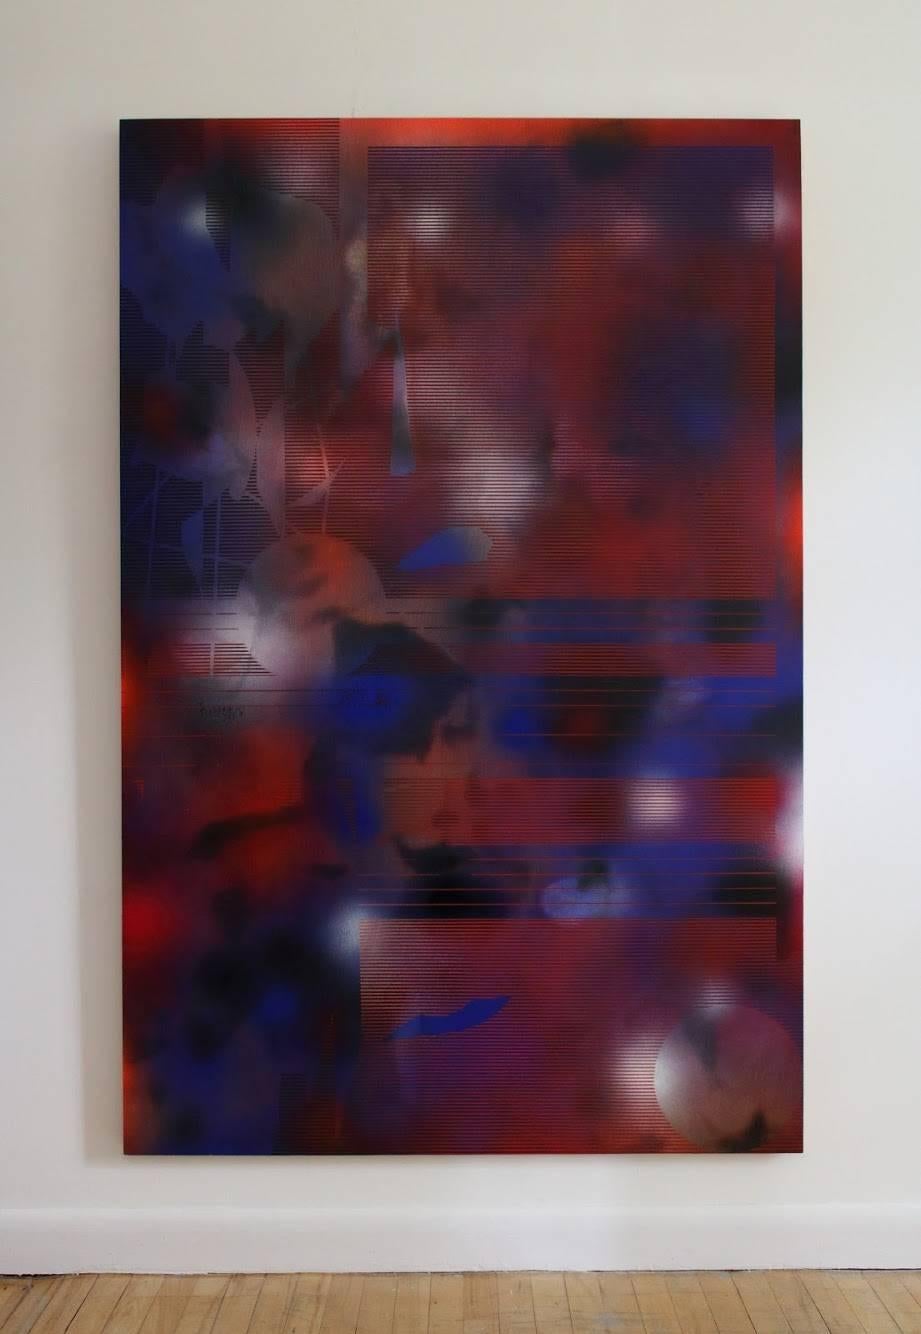 Turbulence 18 (grid painting abstract wood contemporary dark blue burgundy art) - Painting by Melisa Taylor Metzger